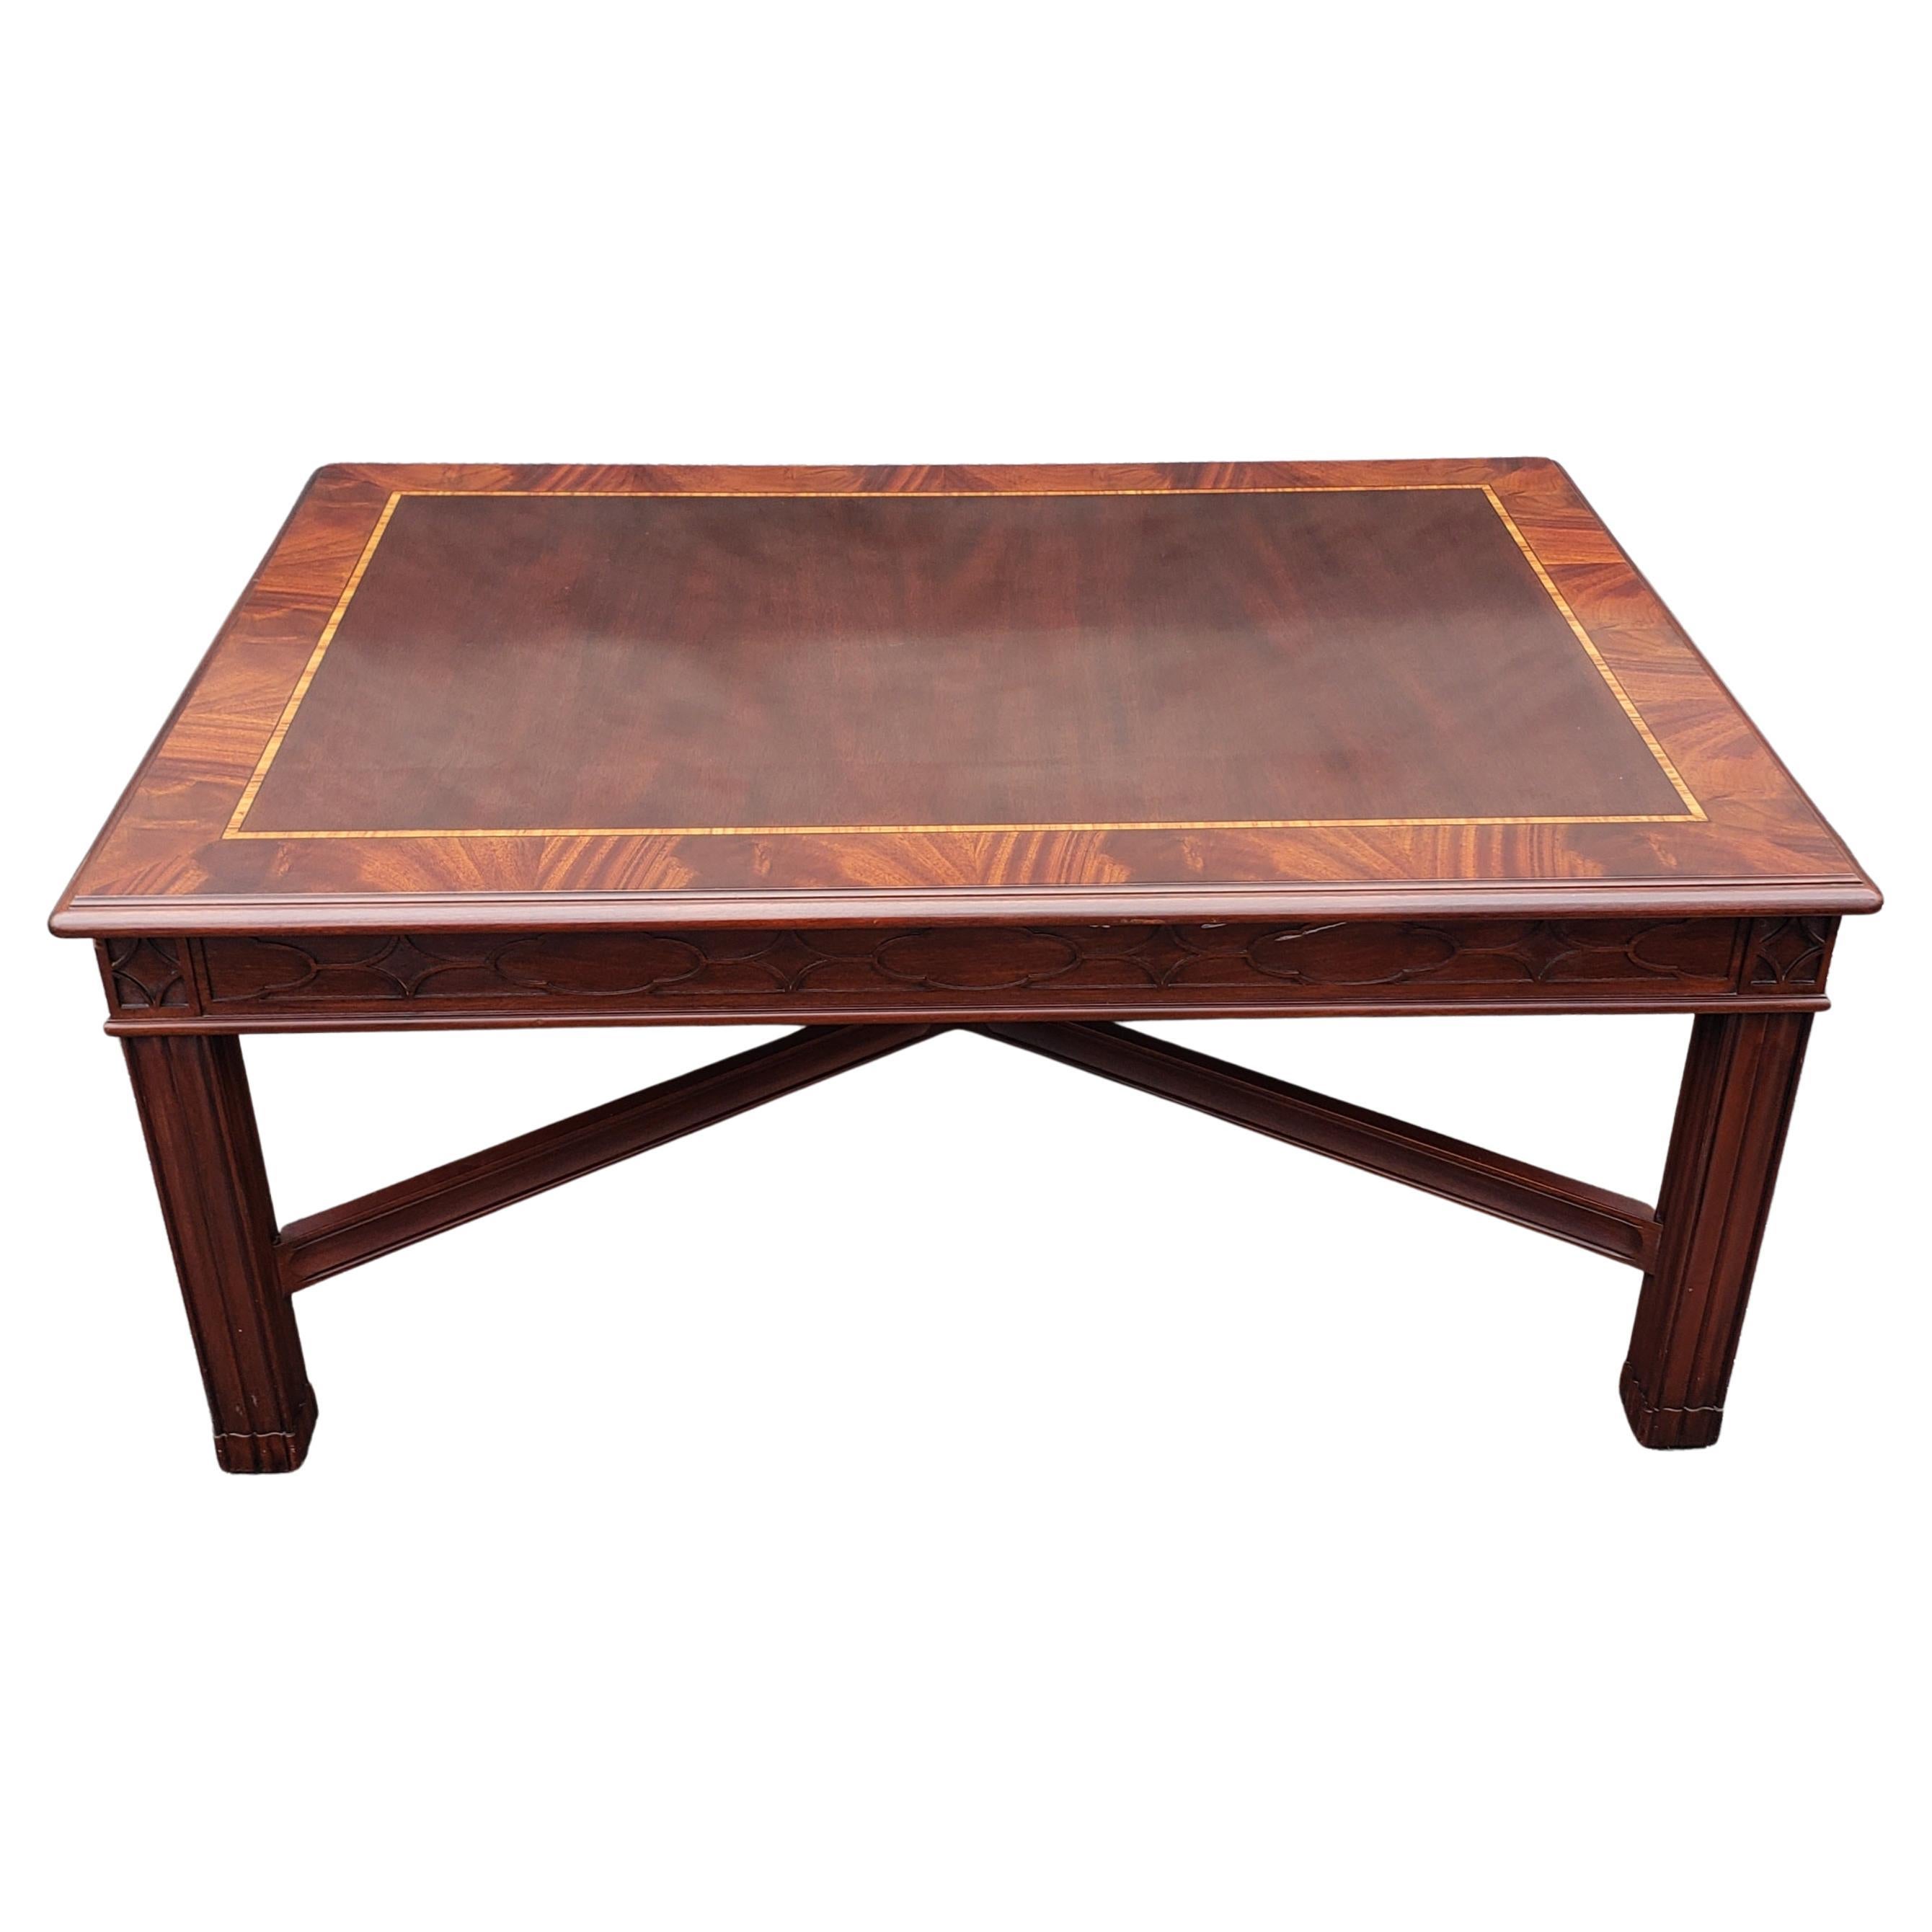 Henkel Harris Banded Flame Mahogany and Tulipwood Inlay Coffee Table w/ Fretwork For Sale